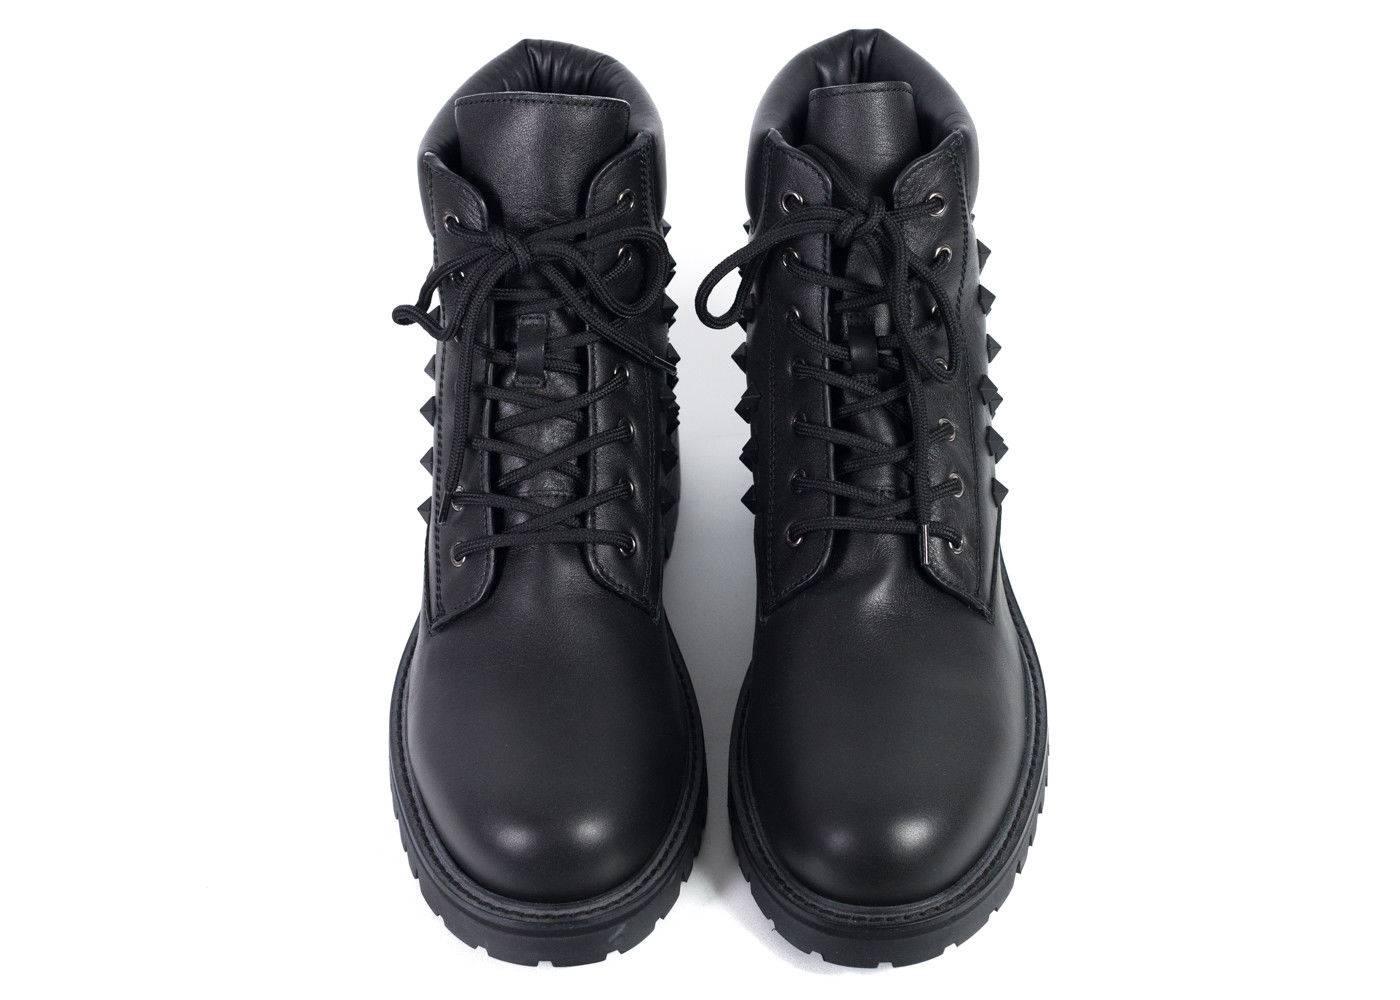 Brand New Valentino Men's Combat Boots
Original Box & Dust Bag Included
Retails in Stores & Online for $1345
Size IT41 / US8 Fits True to Size

Valentino's rendition of a classic black combat boot with their house's signature rocketed